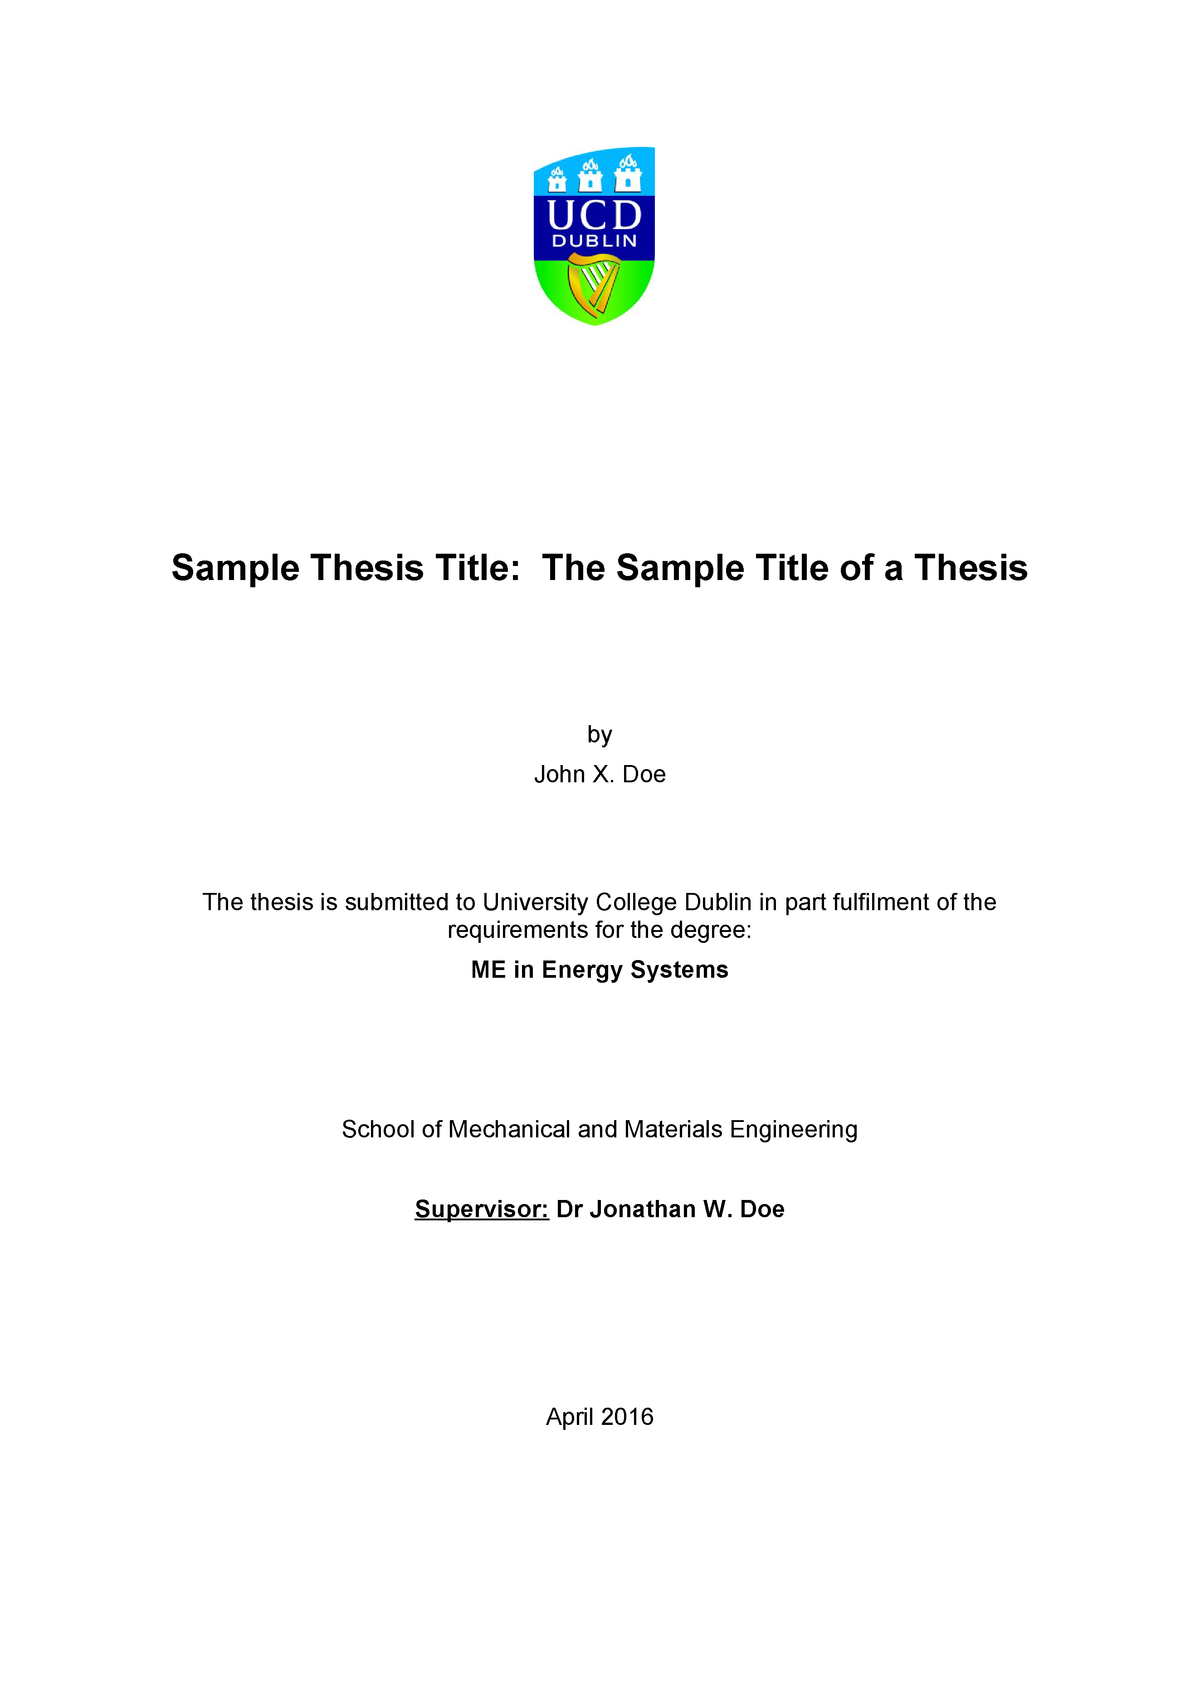 creating thesis title